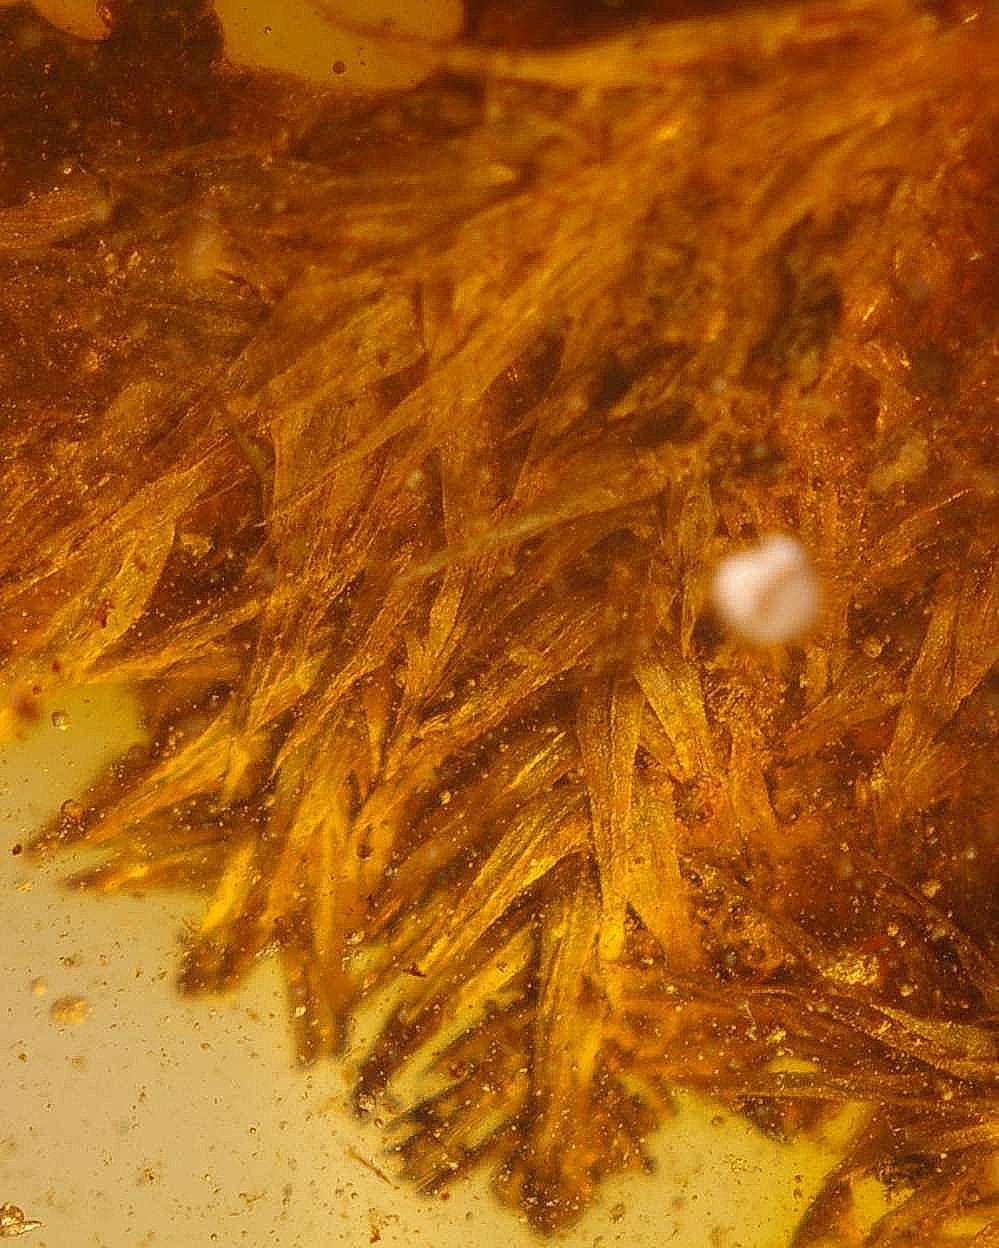 Fossil plant in Baltic amber